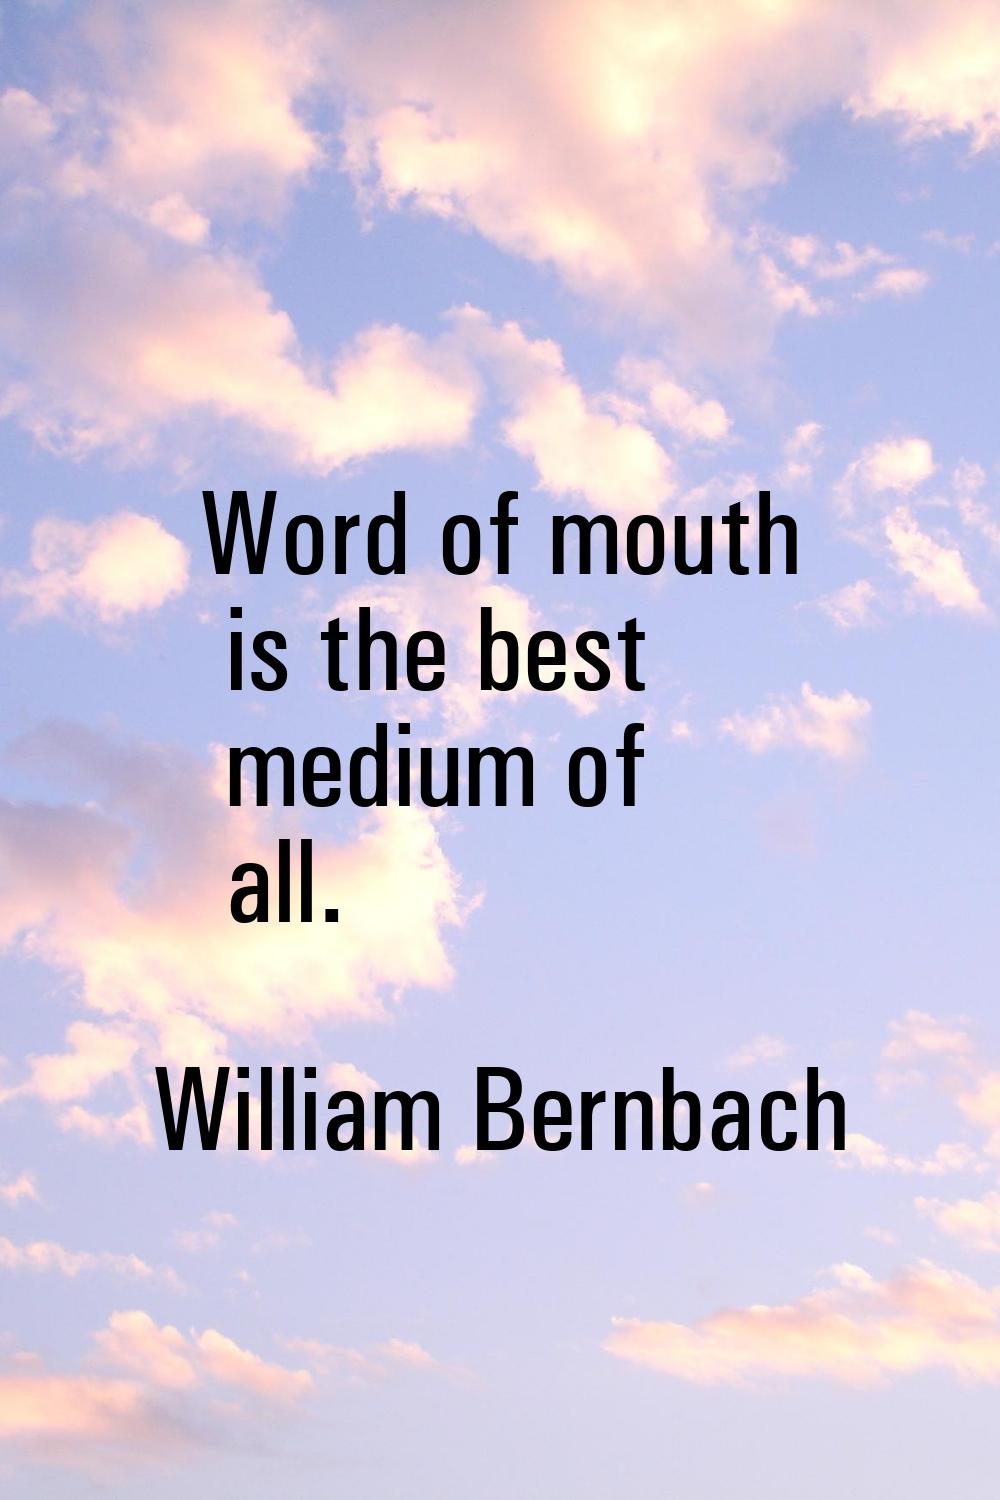 Word of mouth is the best medium of all.